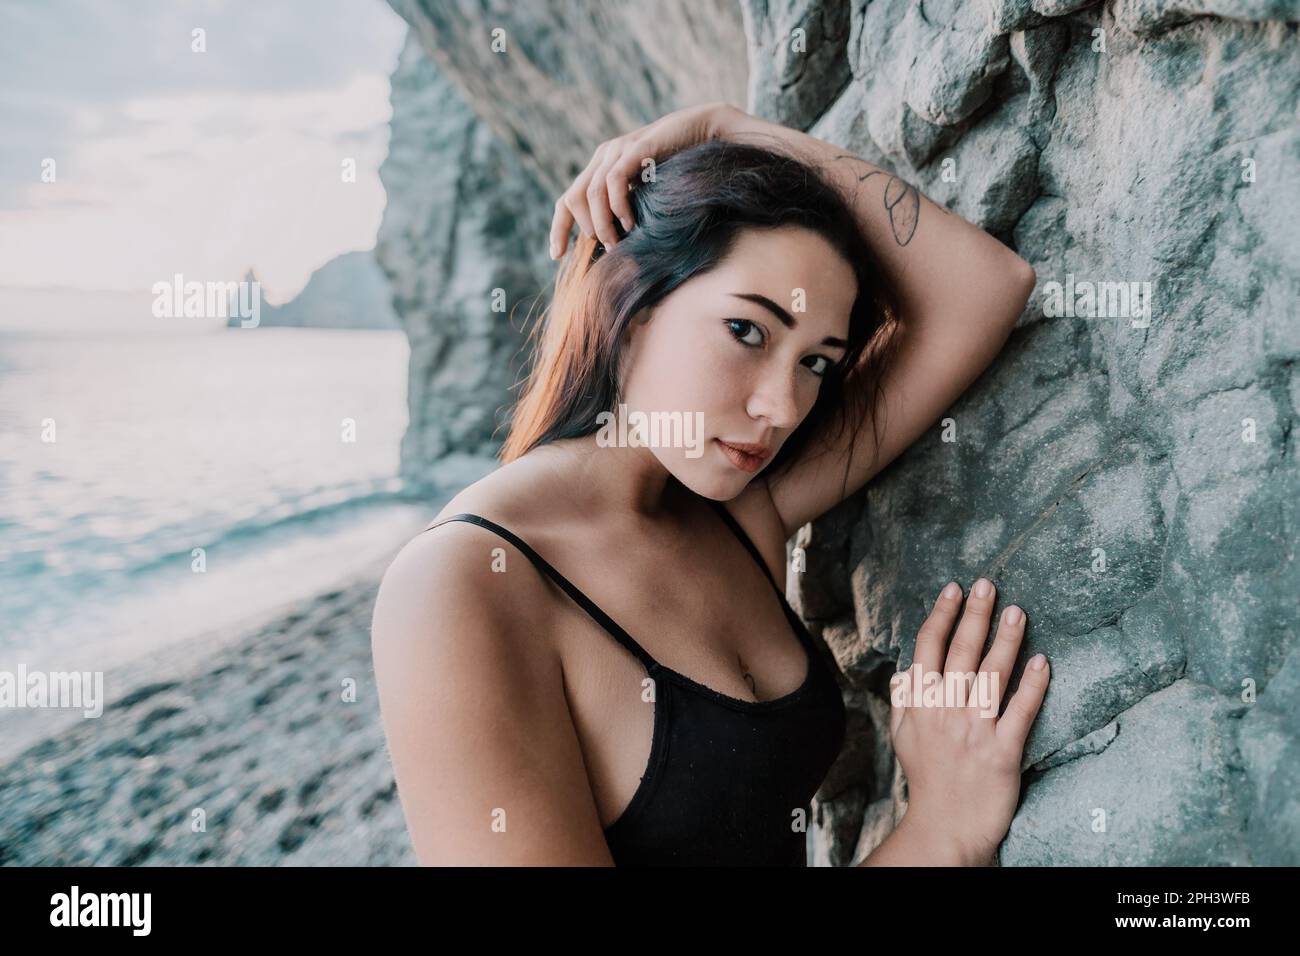 Portrait of cheerful female climber resting on a volcanic basalt Stock Photo